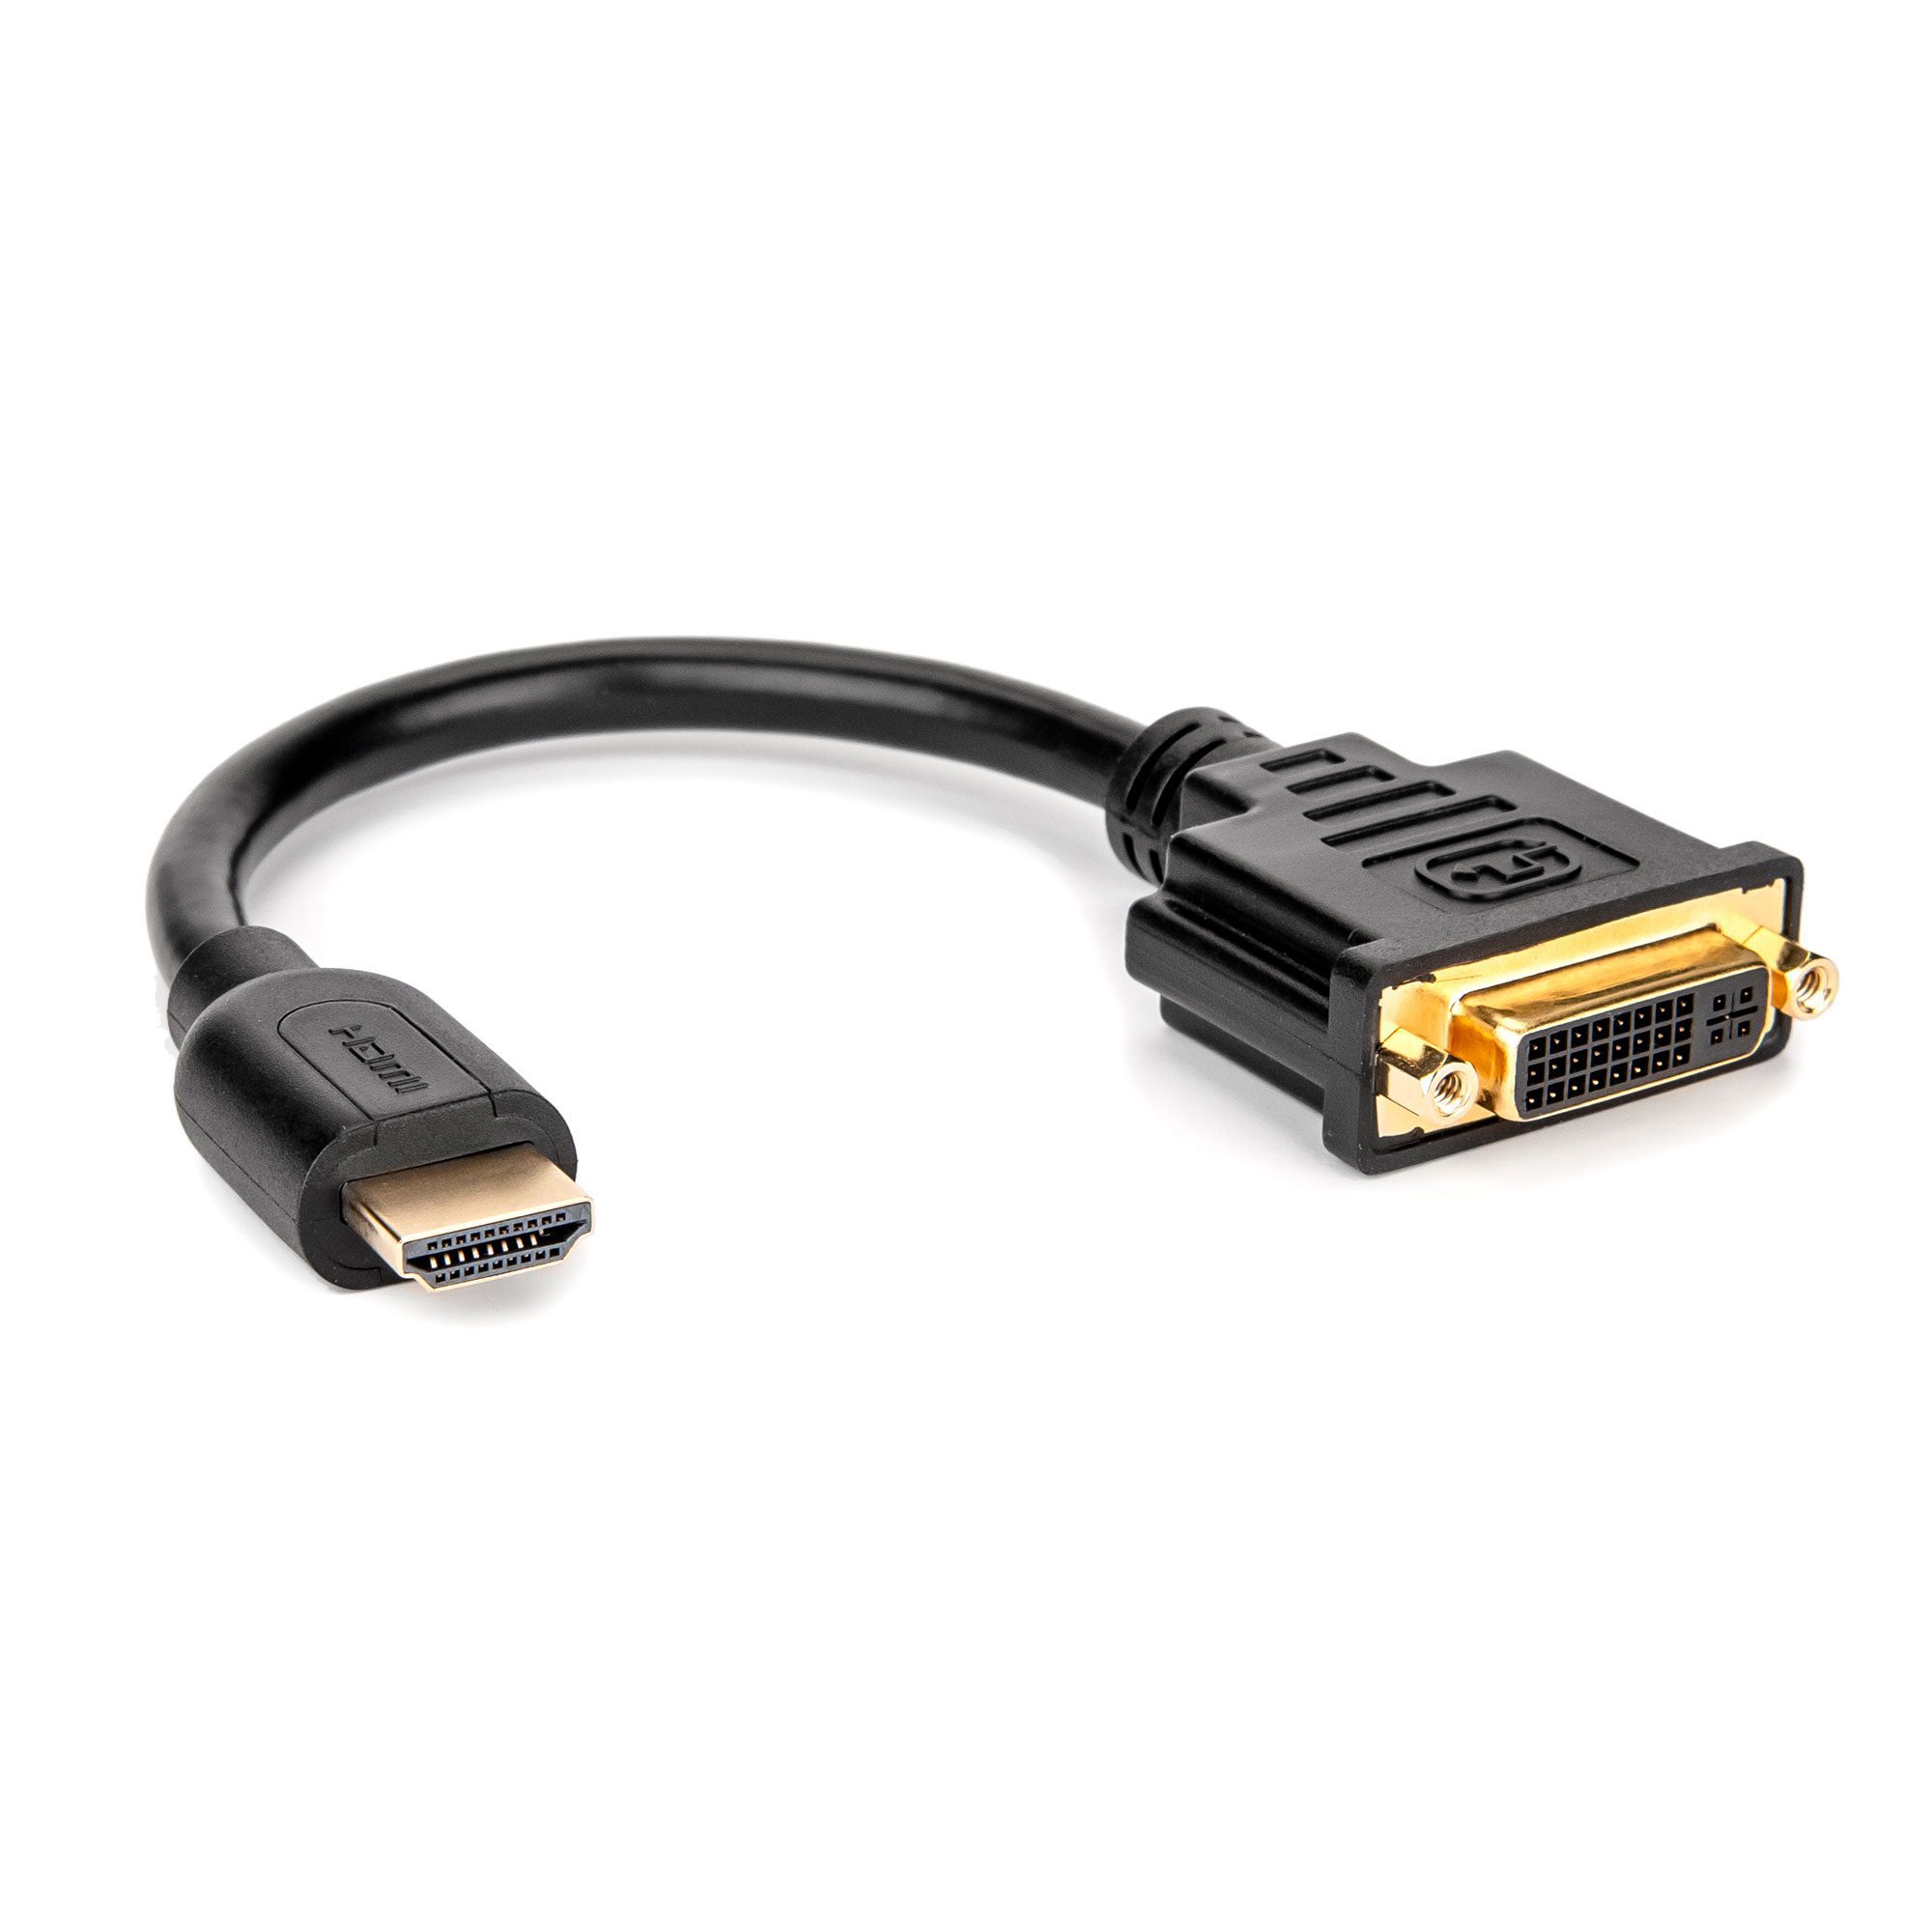 HDMI® to DVI-D Video Cable Adapter - M/F - HDMI® Cables & HDMI Adapters